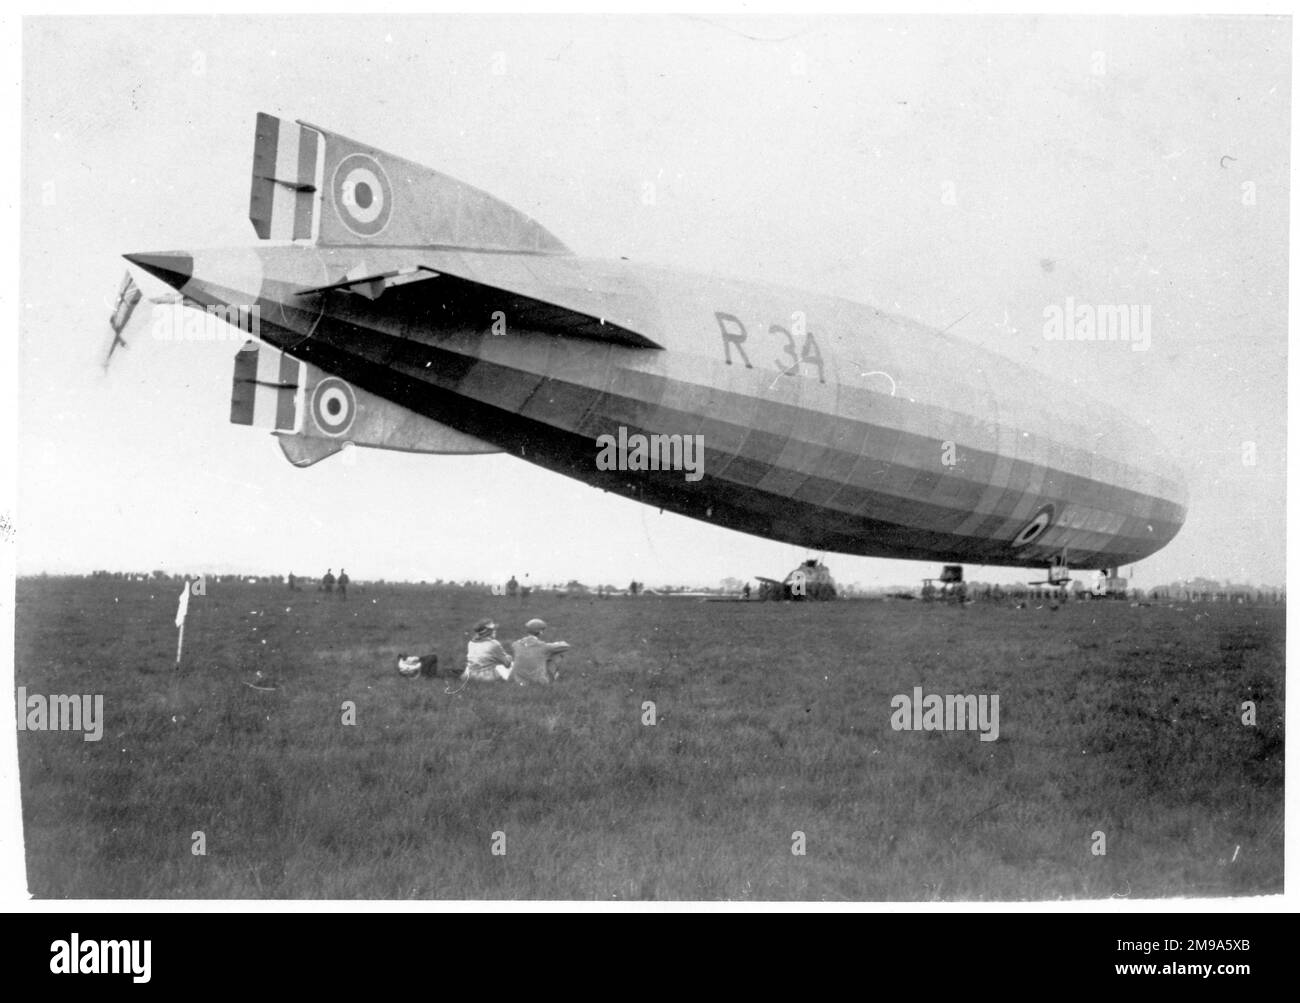 His Majestys Airship R34. Built by by William Beardmore and Company in Inchinnan, Renfrewshire, Scotland, R34 first flew on 14 March 1919 and later made the first East-West aerial crossing of the Atlantic Ocean. Success was short lived and R34 was damaged beyond repair in January 1921. Stock Photo